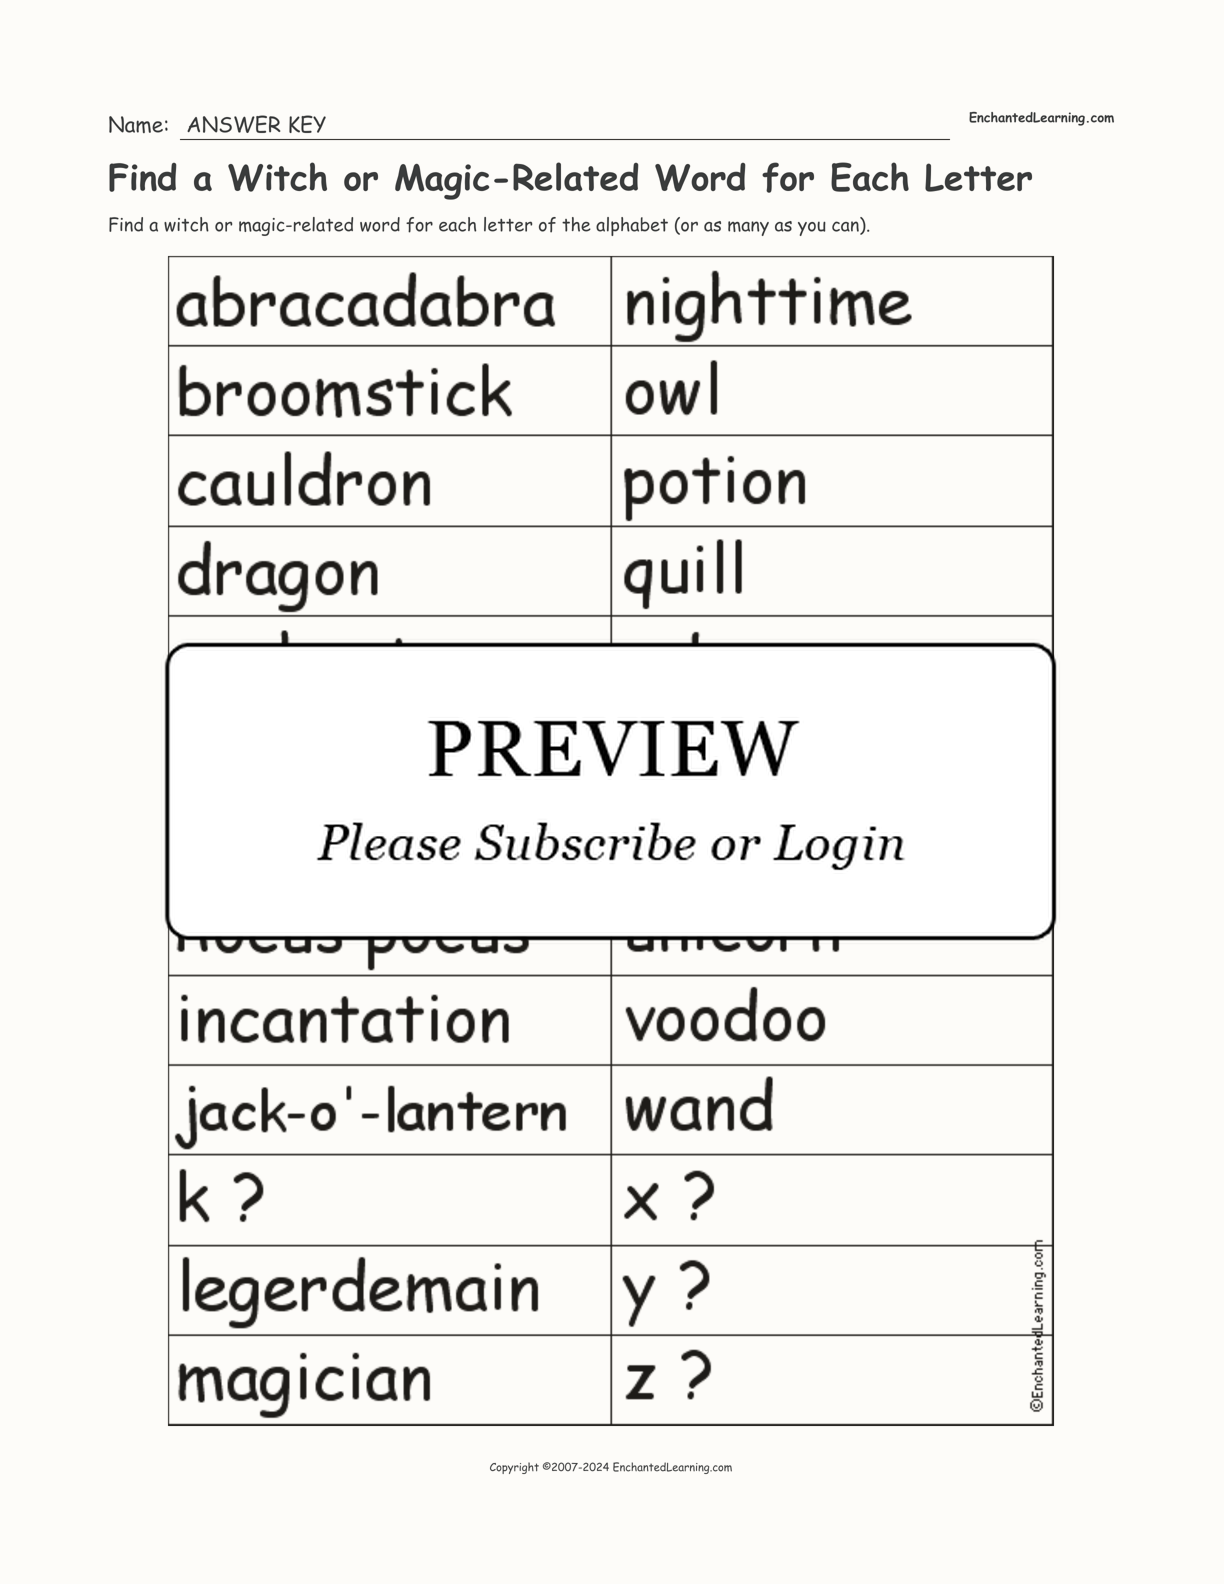 Find a Witch or Magic-Related Word for Each Letter interactive worksheet page 2